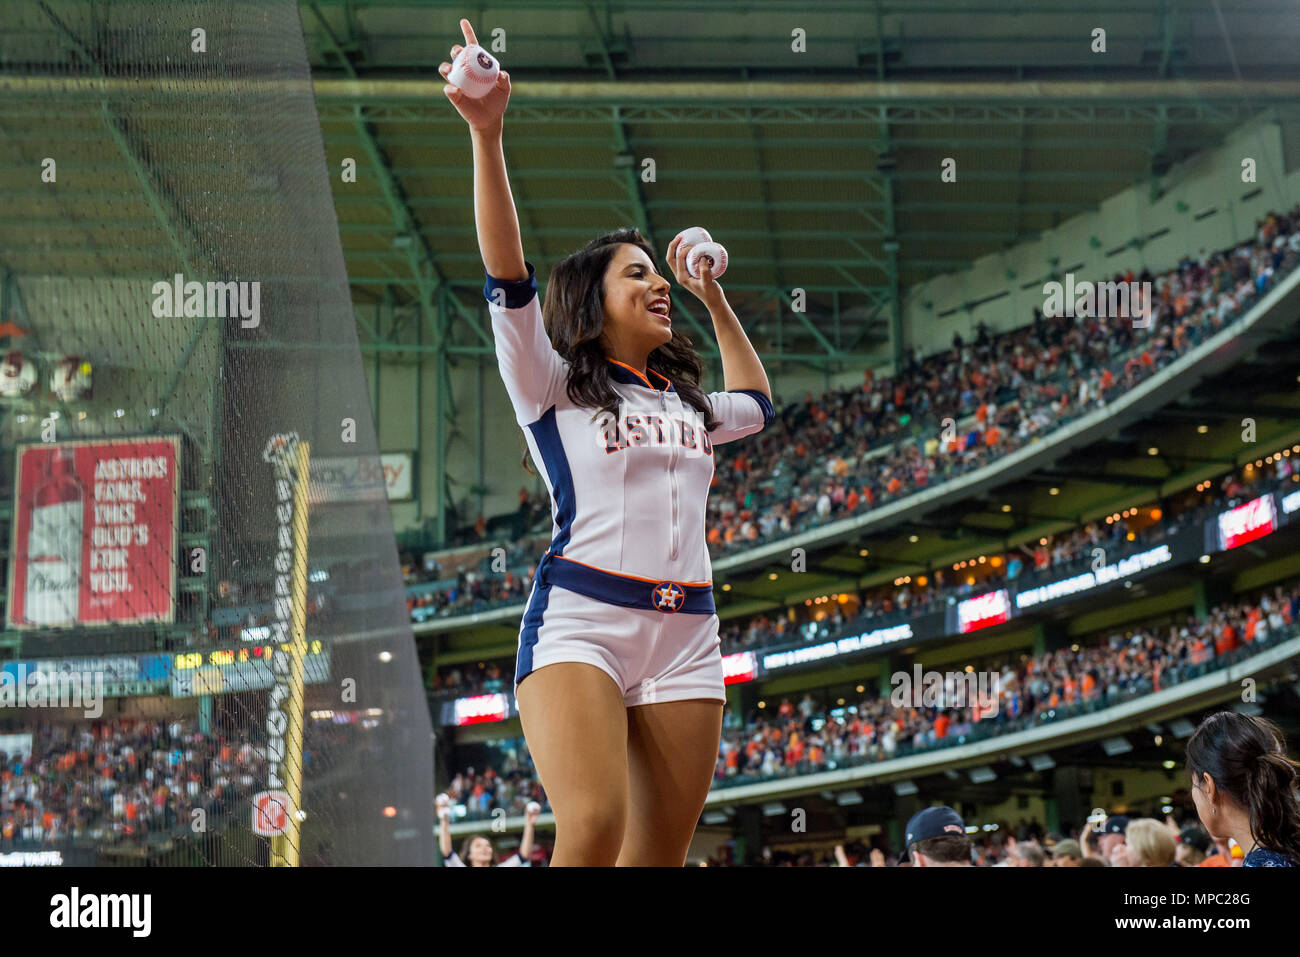 Houston, TX, USA. 19th May, 2018. An Astros Shooting Stars team member  performs during a Major League Baseball game between the Houston Astros and  the Cleveland Indians at Minute Maid Park in